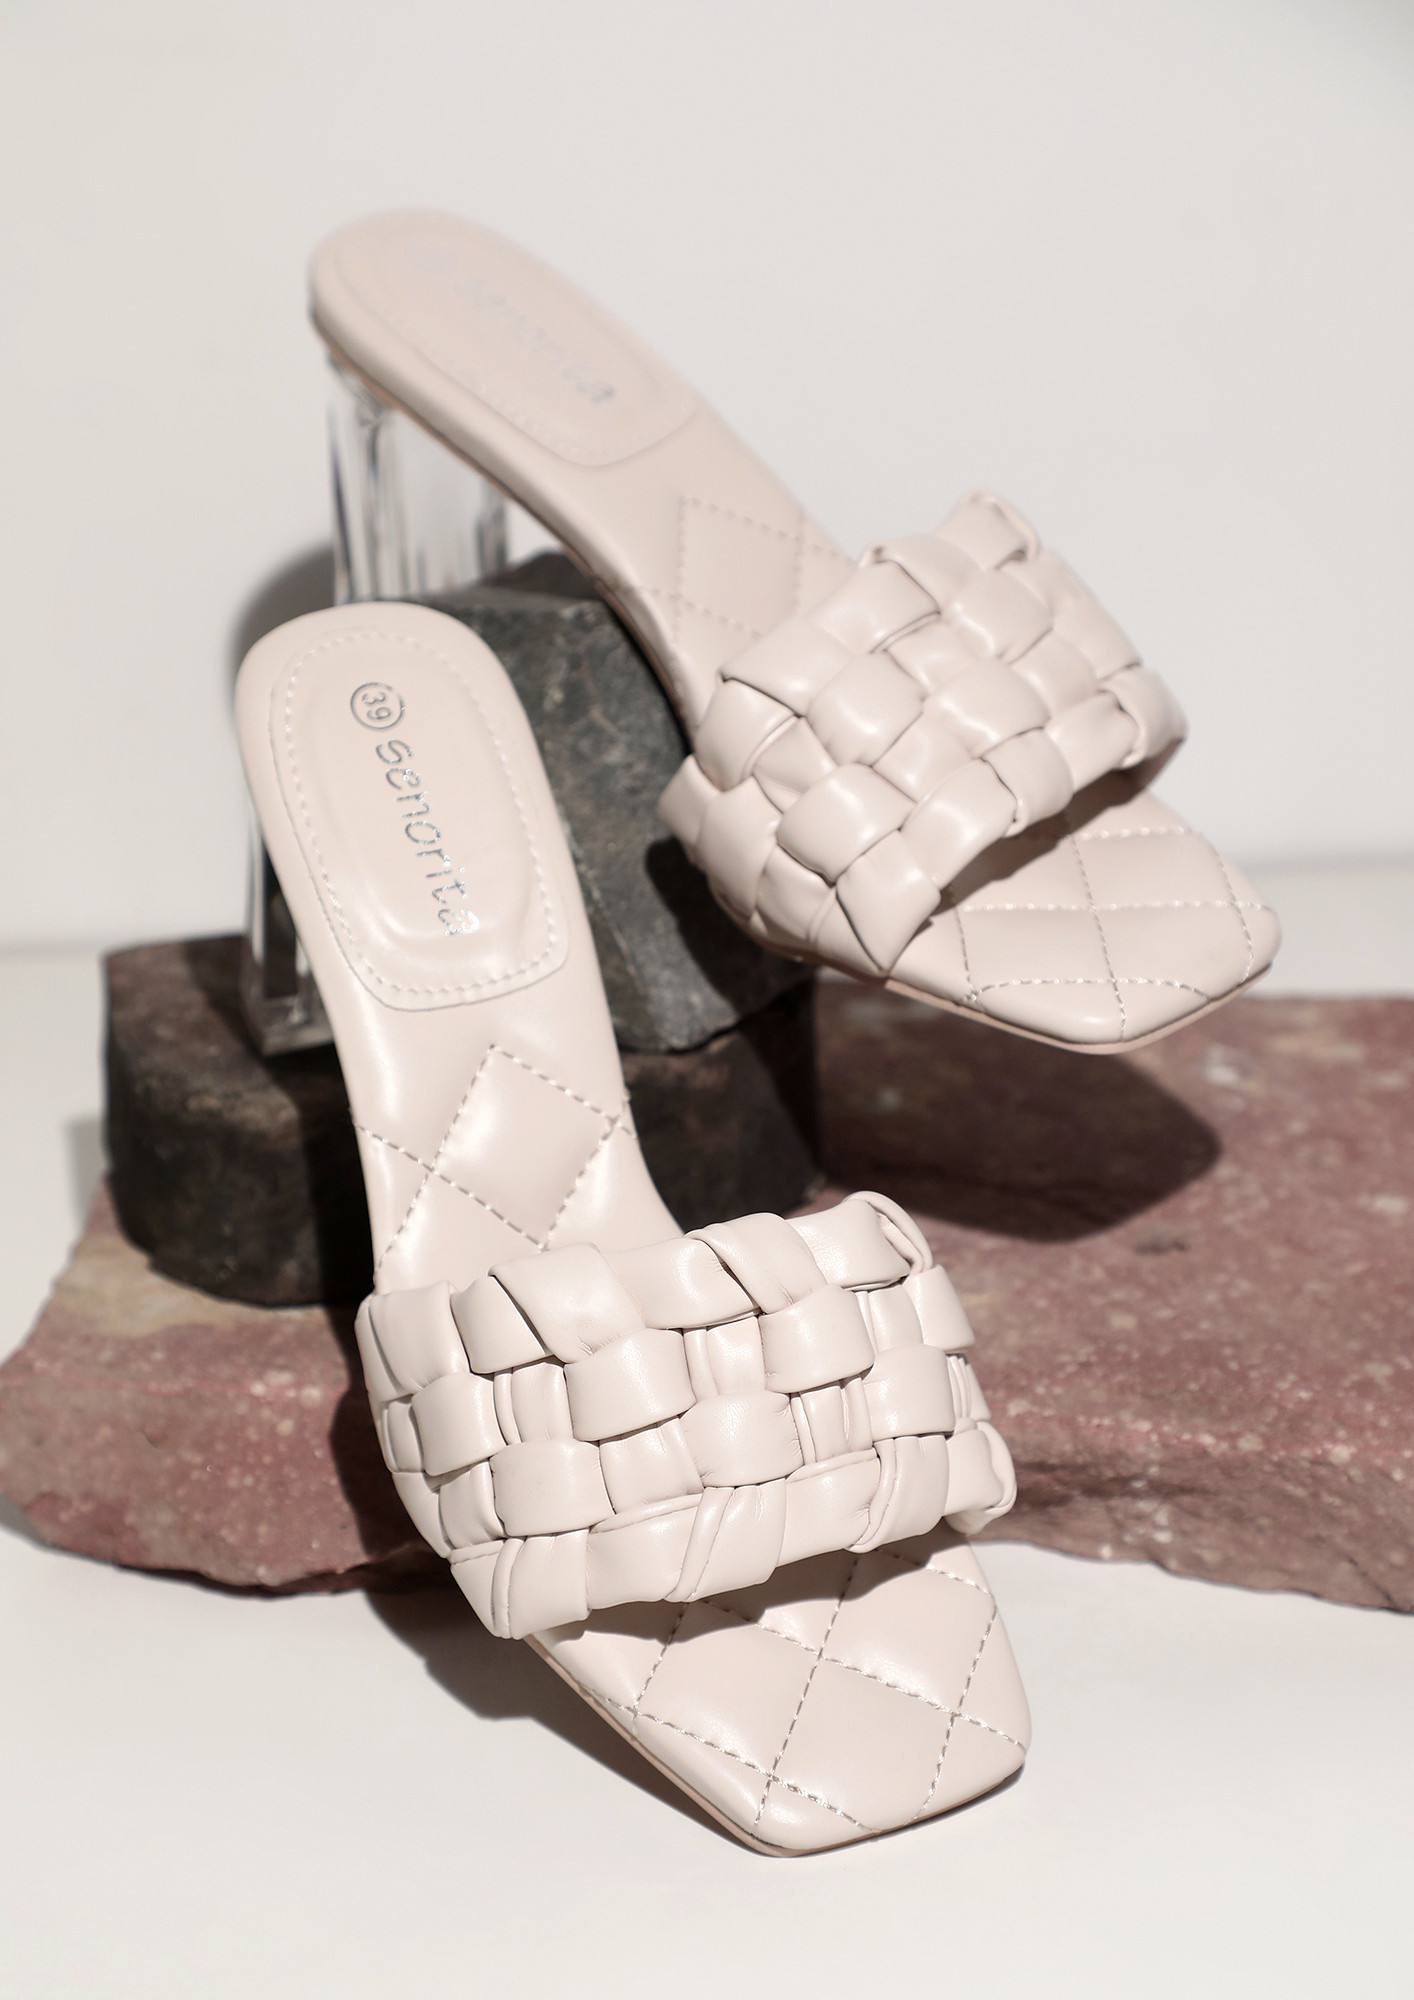 Absolute And More Quilted, Weave, Patterned, Slip-On, Beige, Transparent, Block Heel Sandals